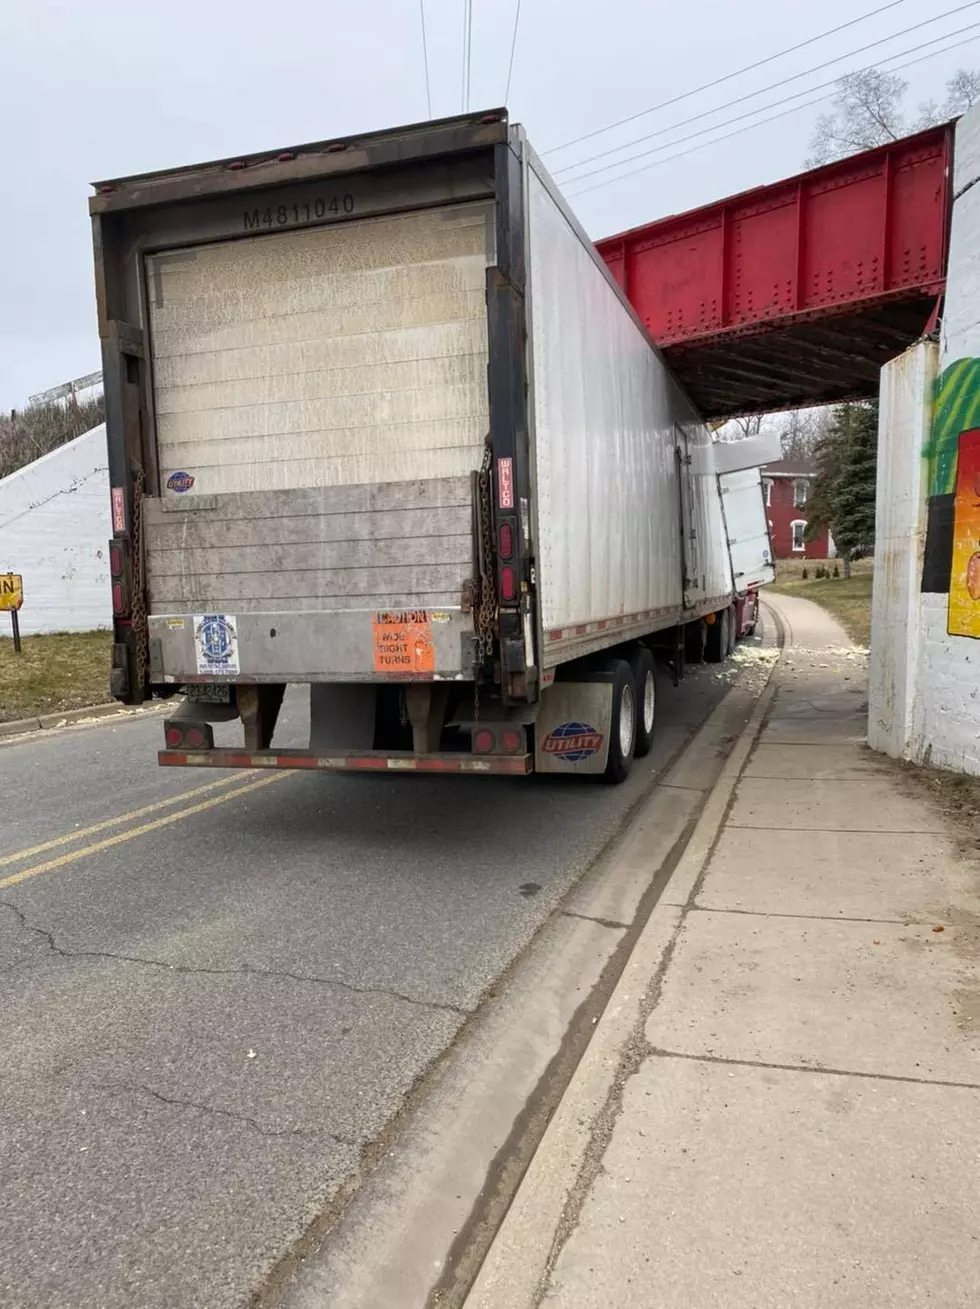 This Semi Trailer Got Ripped by Low Clearance Bridge in Bangor